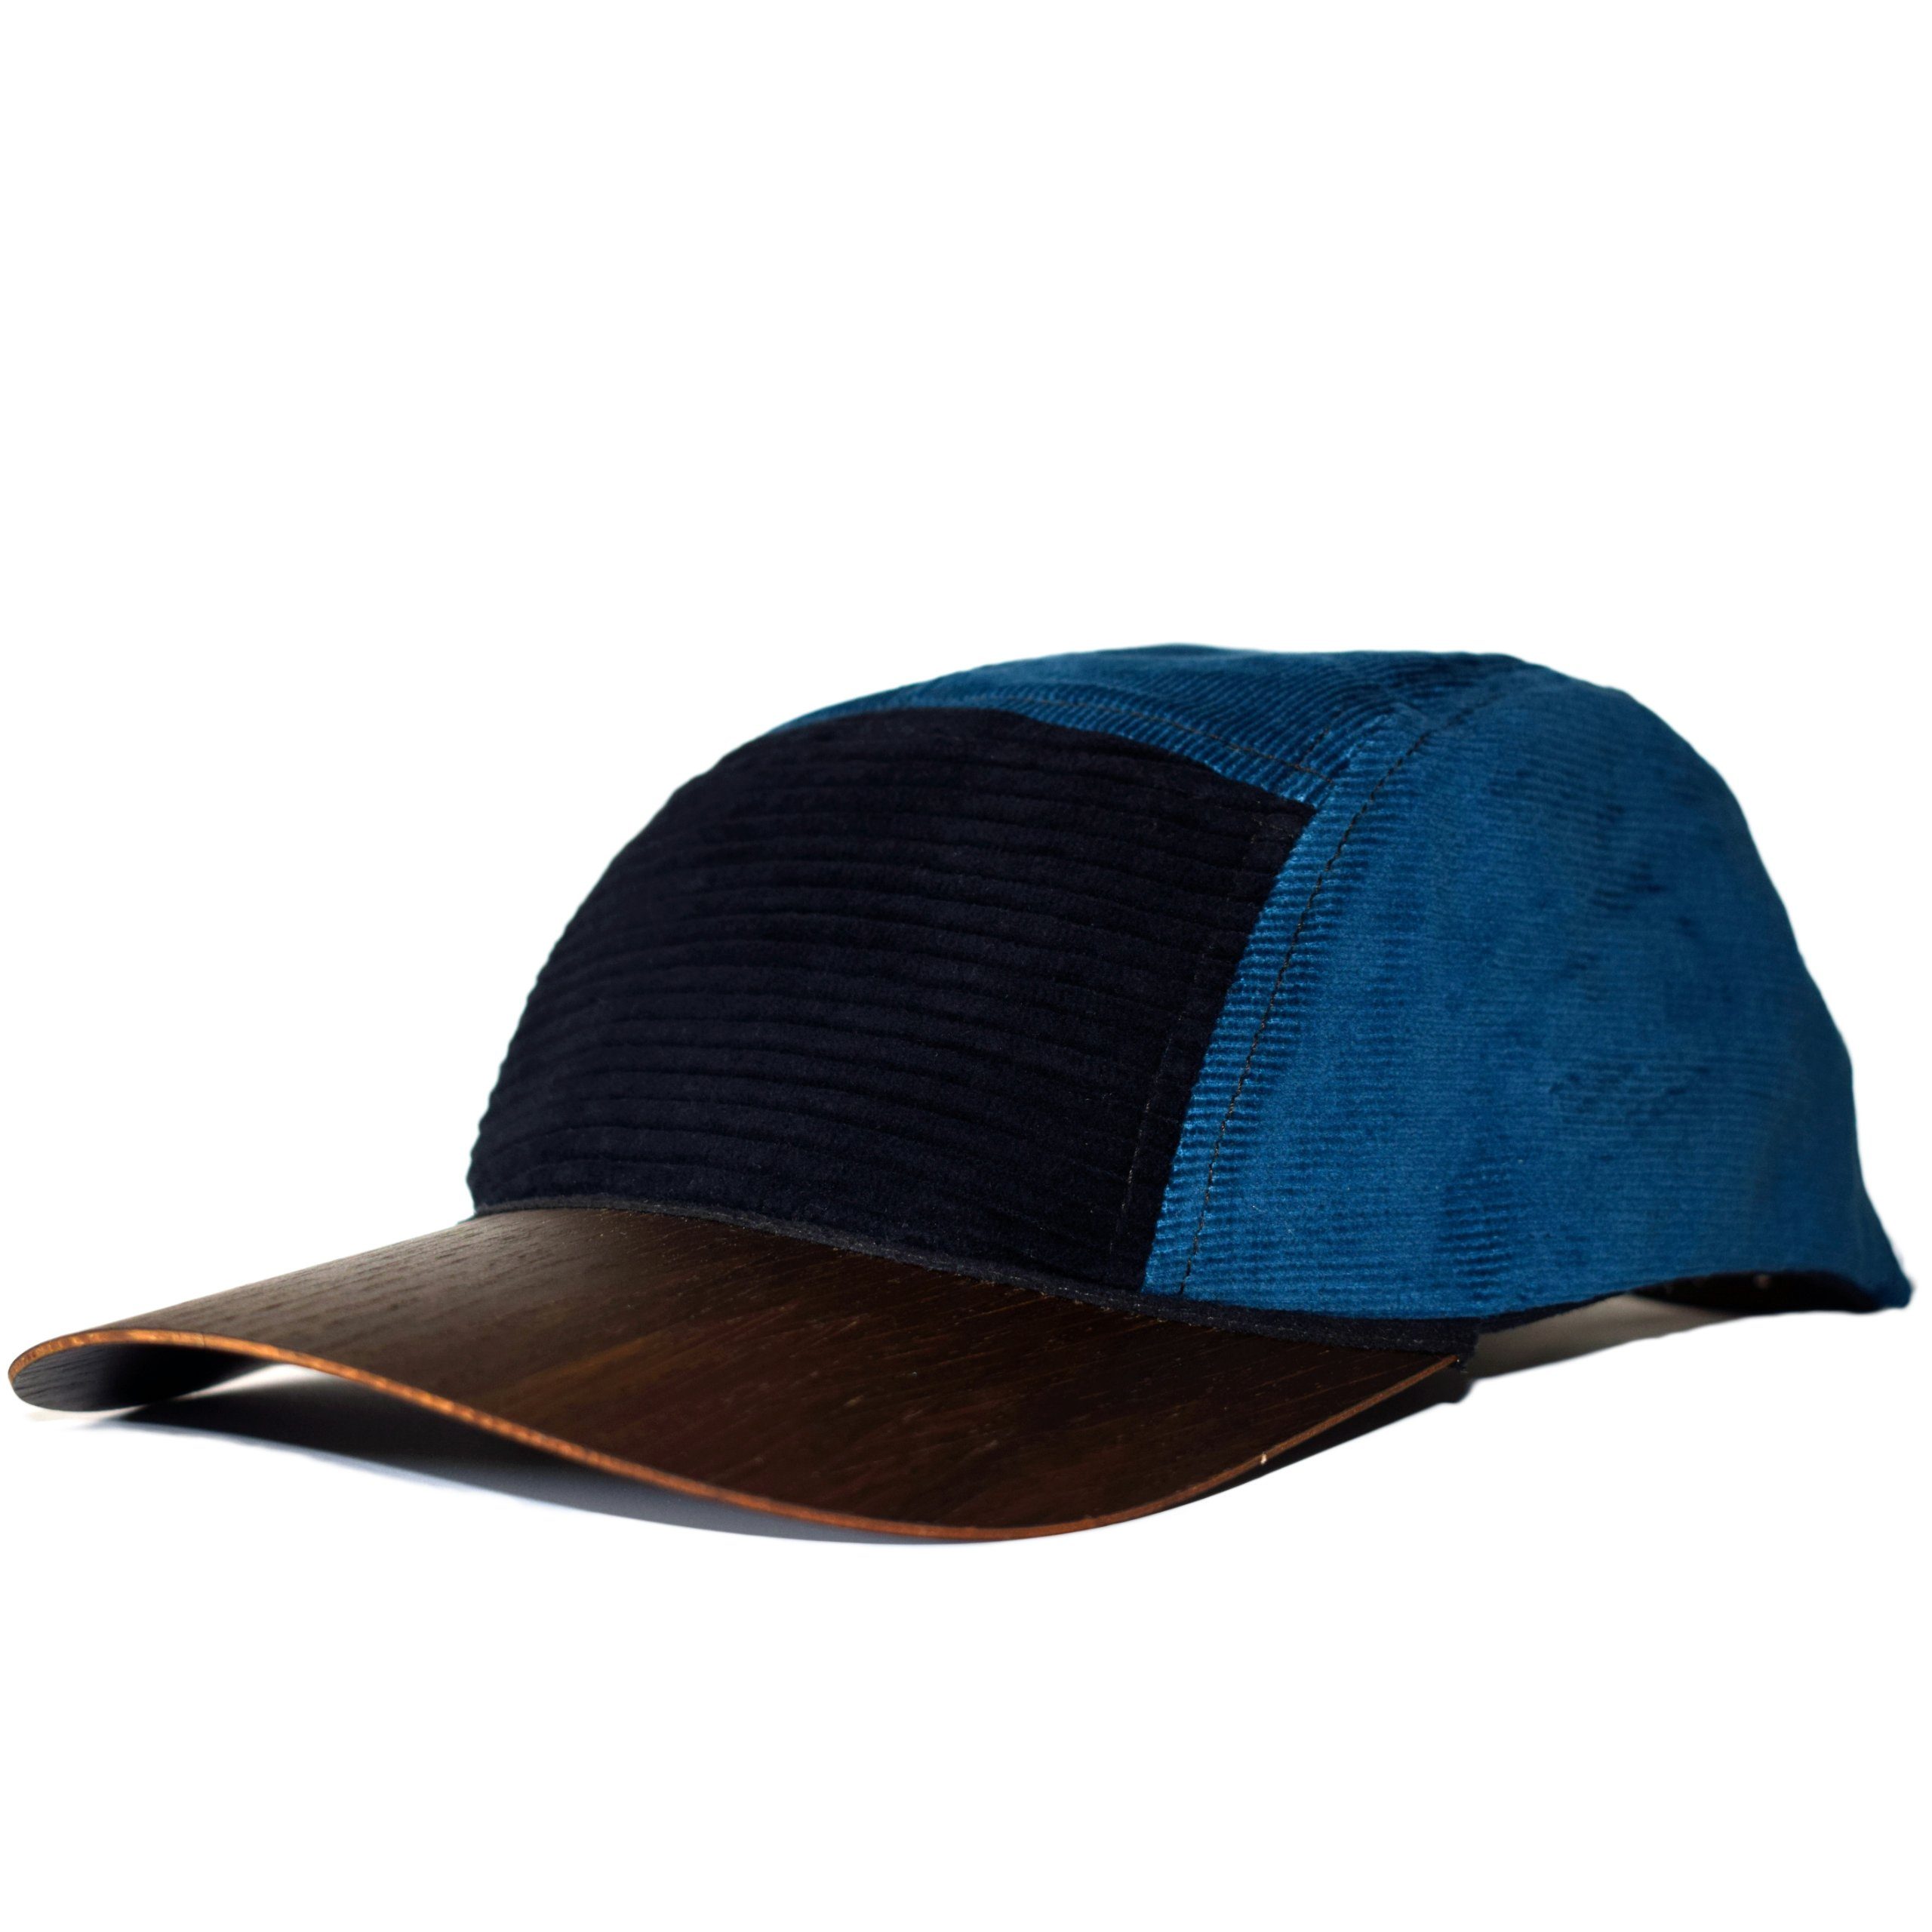 Blau Holzschild Germany Lou-i Cord Cap Snapback Cap Made in mit Holzschild